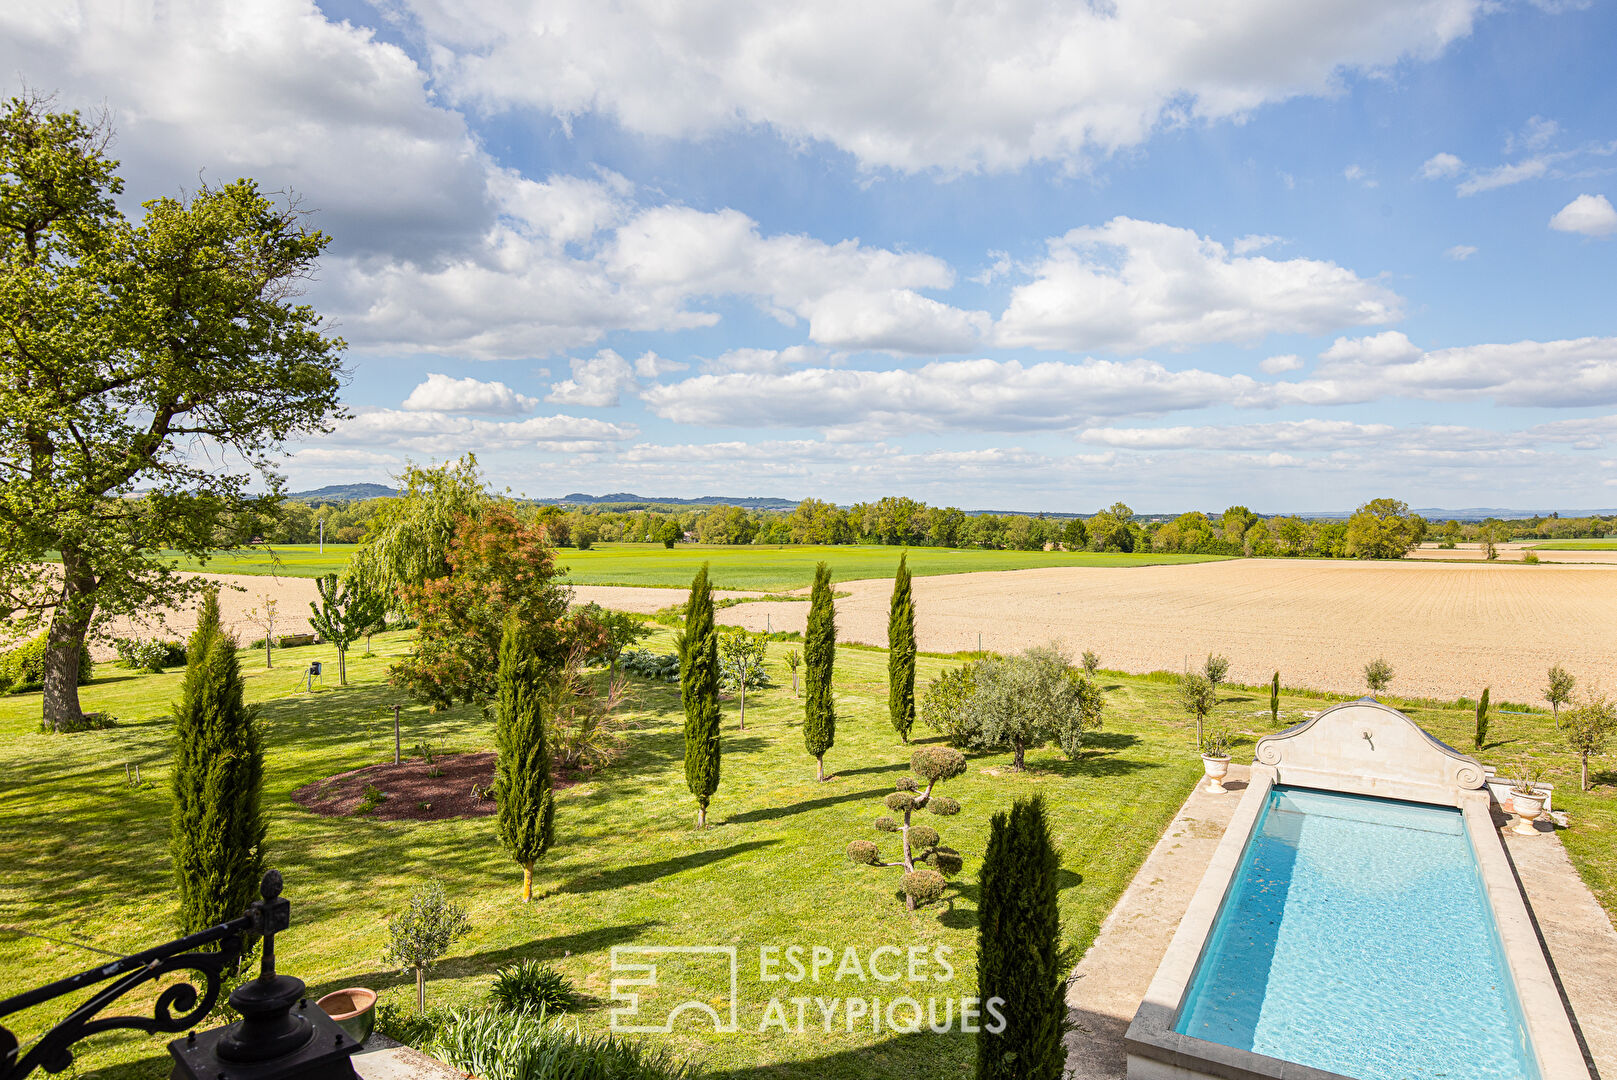 Mansion with swimming pool located between Castres and Revel